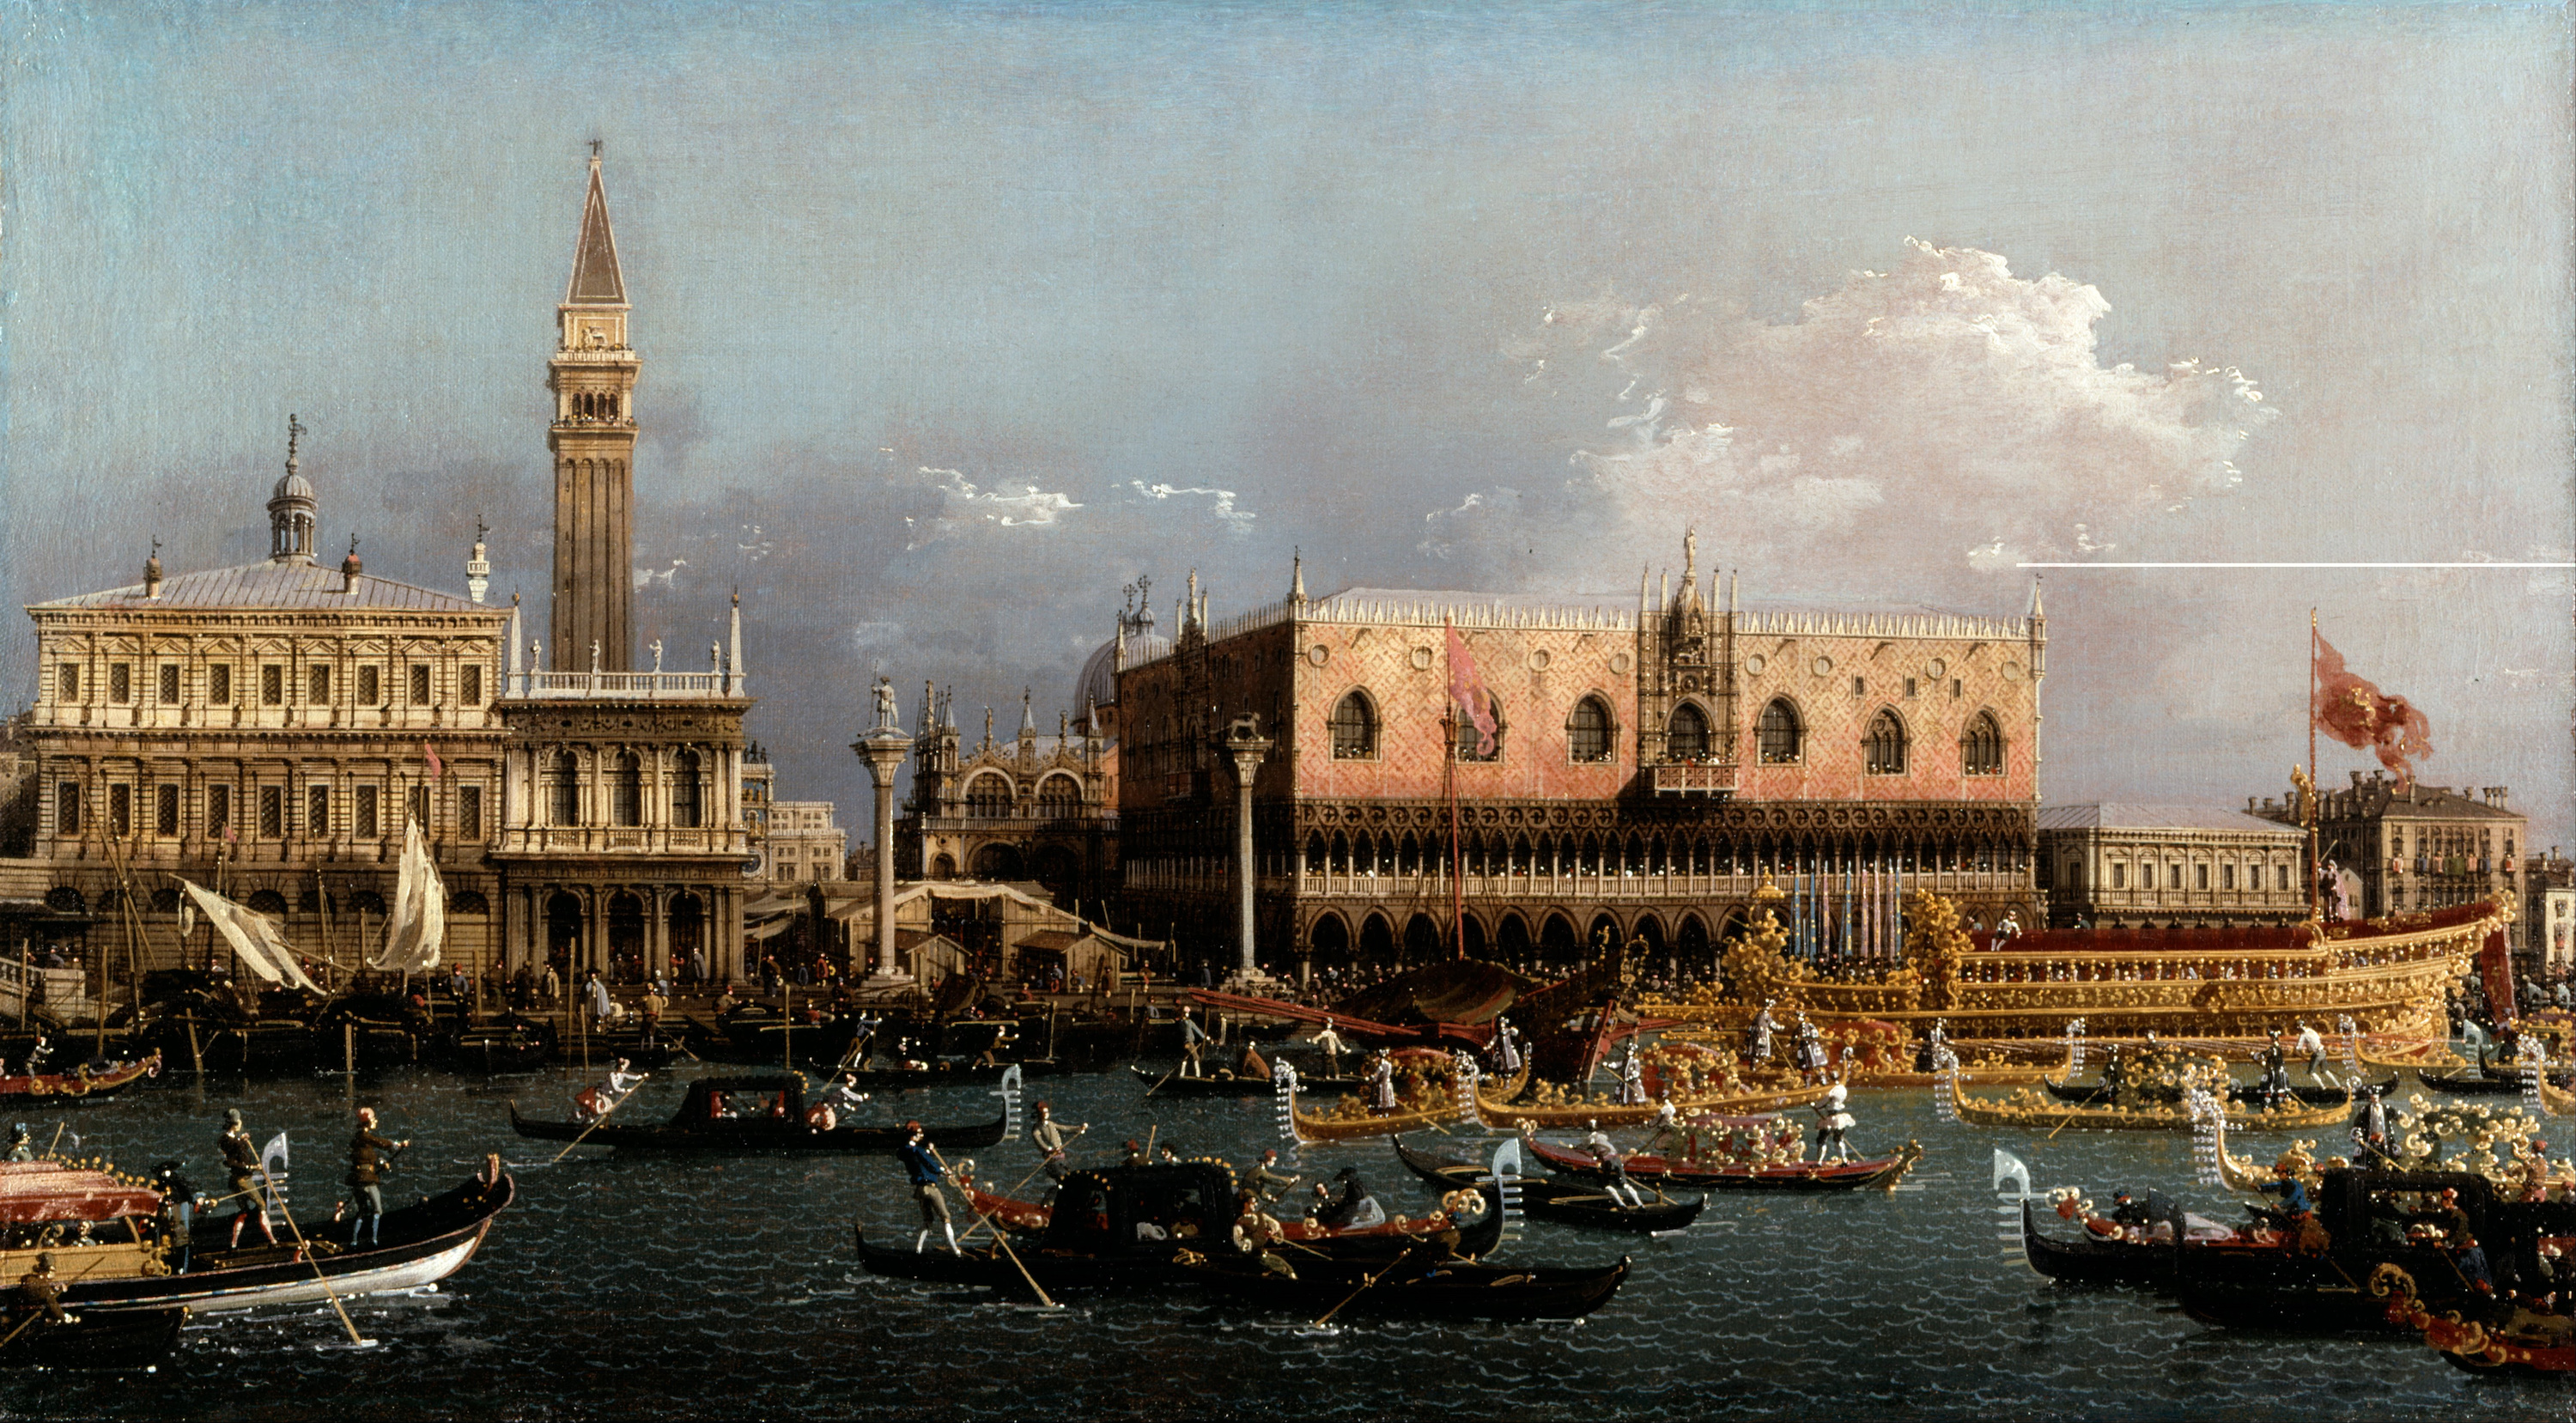 The Bucintoro at the Molo on Ascension Day by Giovanni Antonio Canal (Canaletto) - 1760 - 101.8 x 58.3 cm Dulwich Picture Gallery